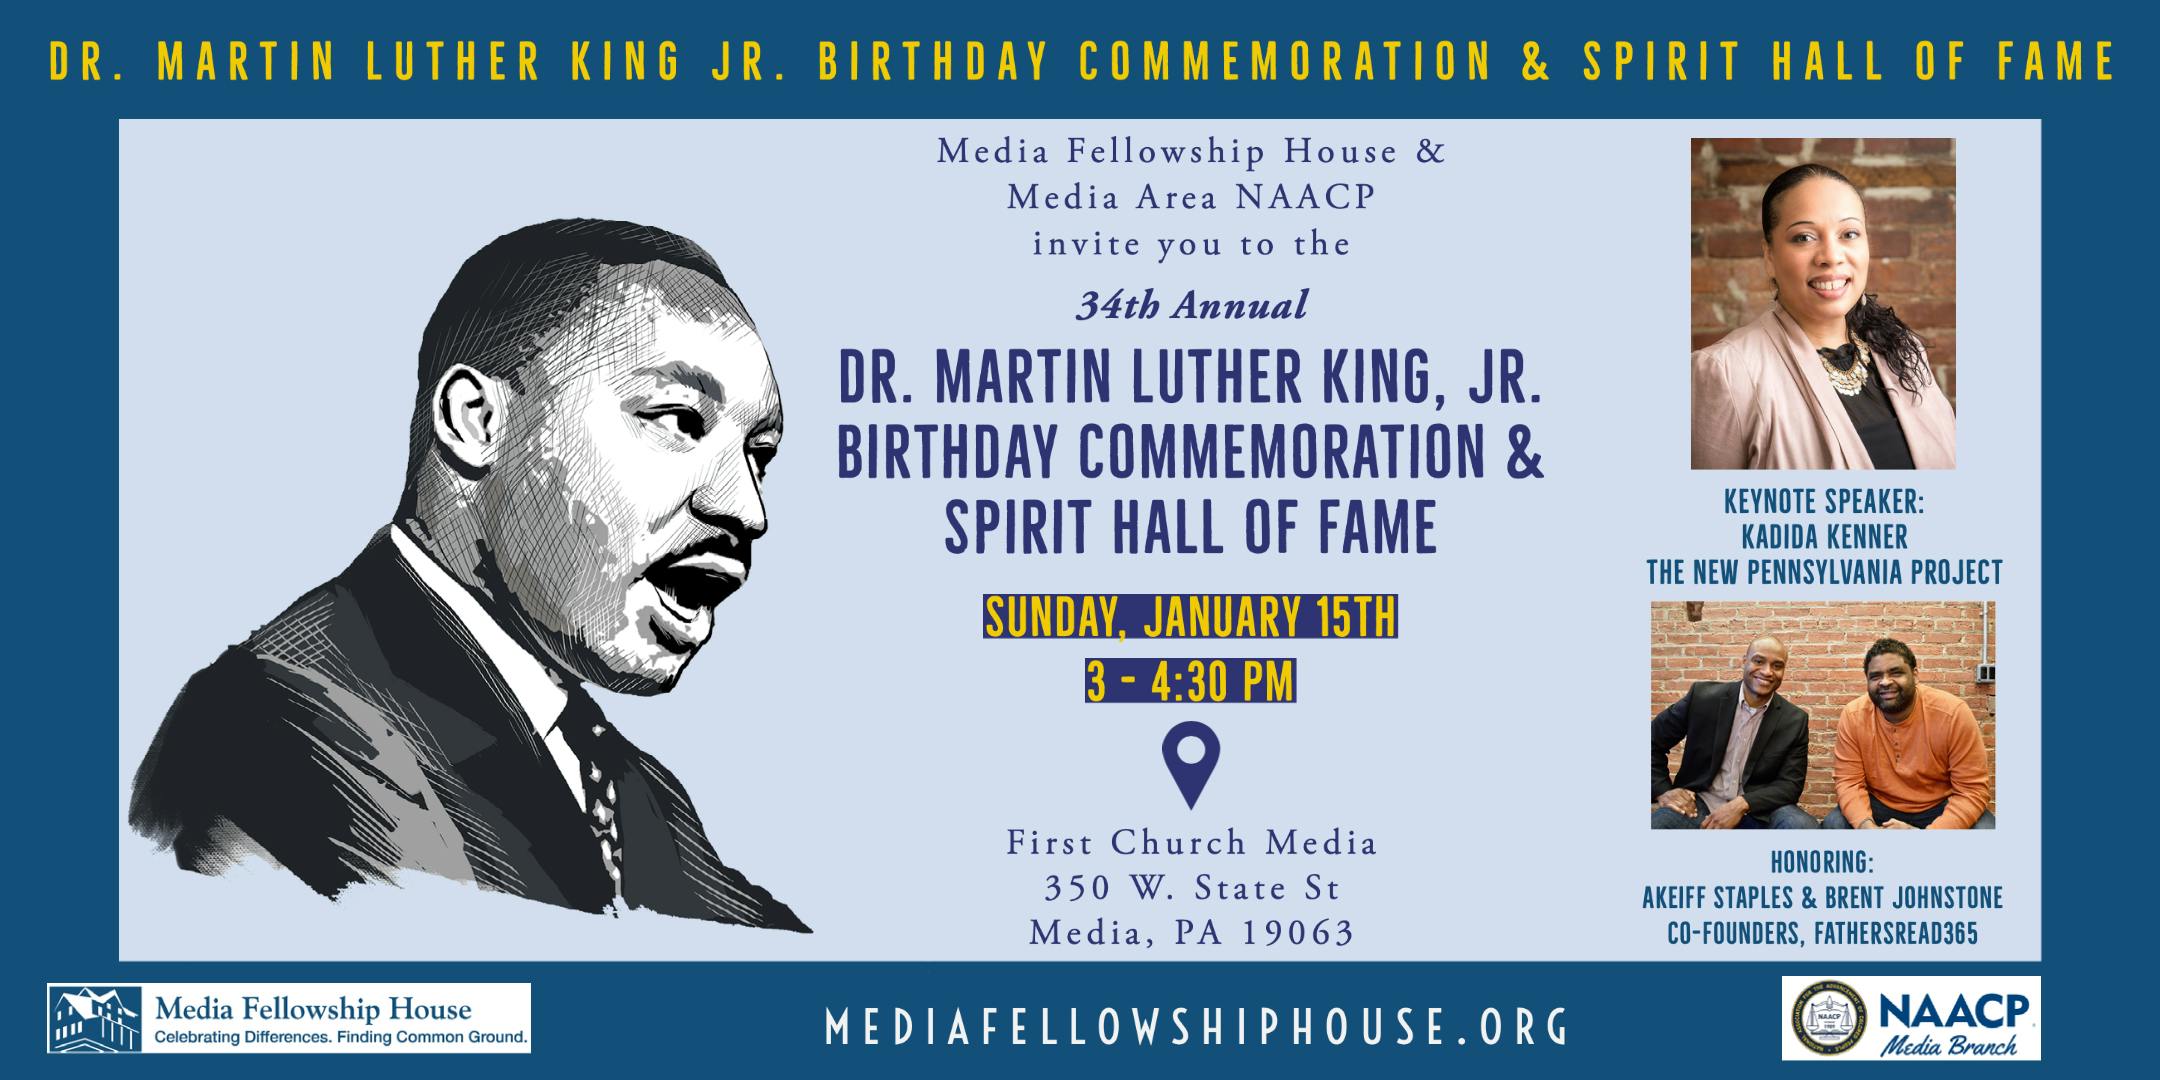 MLK Day 2023: Media Fellowship House Commemorates the Birthday of Dr. King & Celebrates Community Leaders